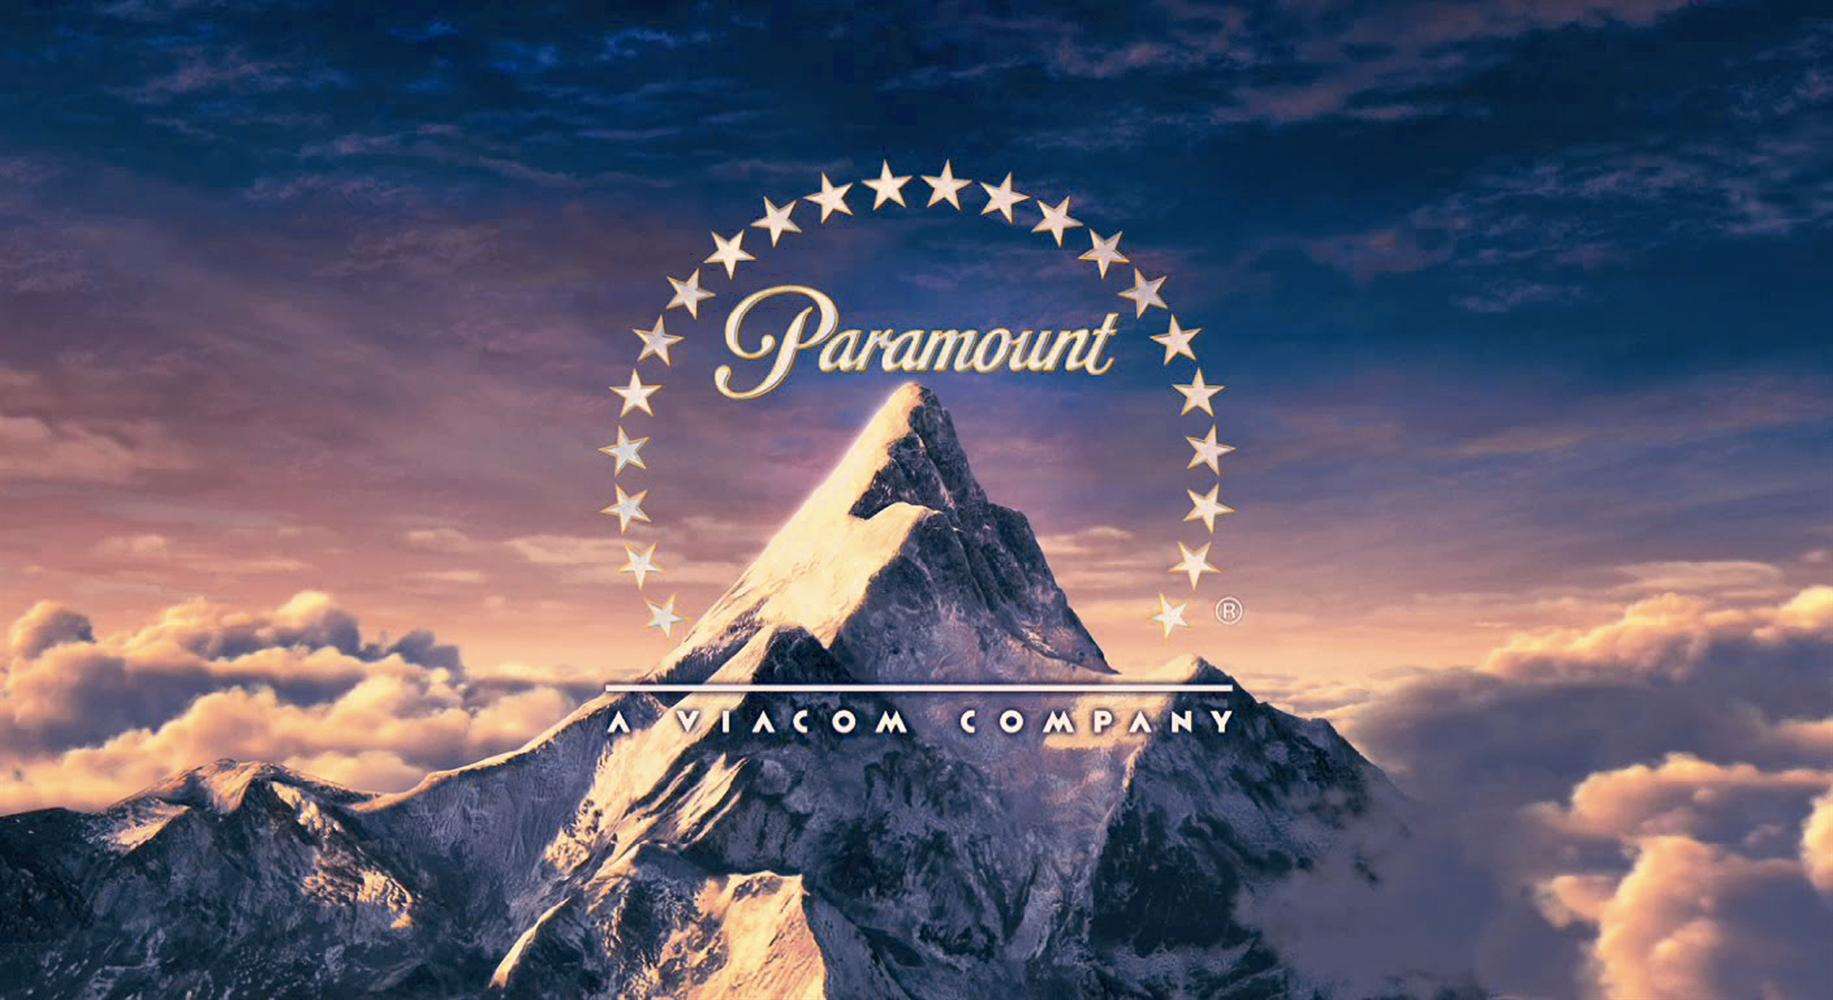 London Resort Company Holdings have an exclusive agreement to use Paramount's intellectual property in the UK